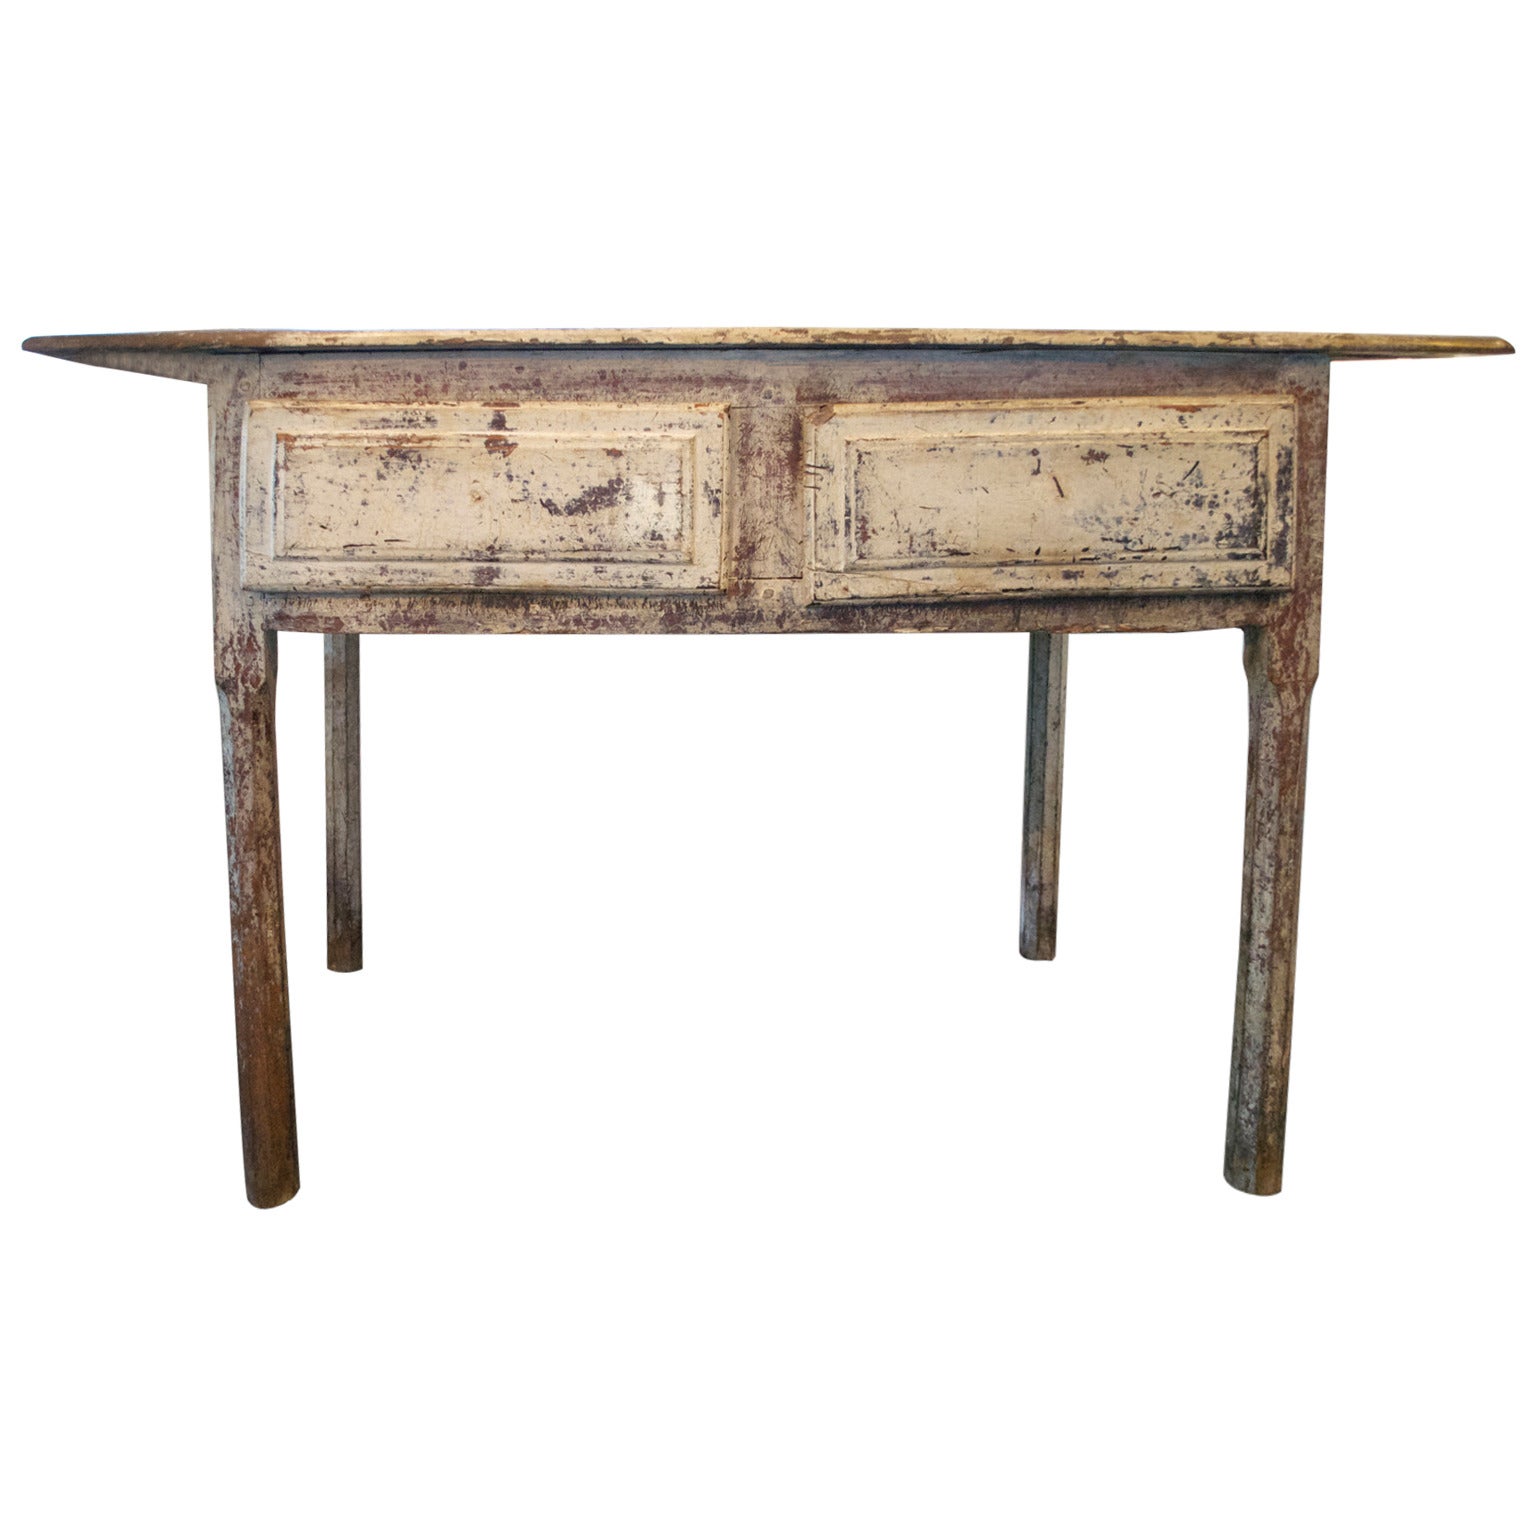 Early 19th Century Directoire Table or Desk For Sale